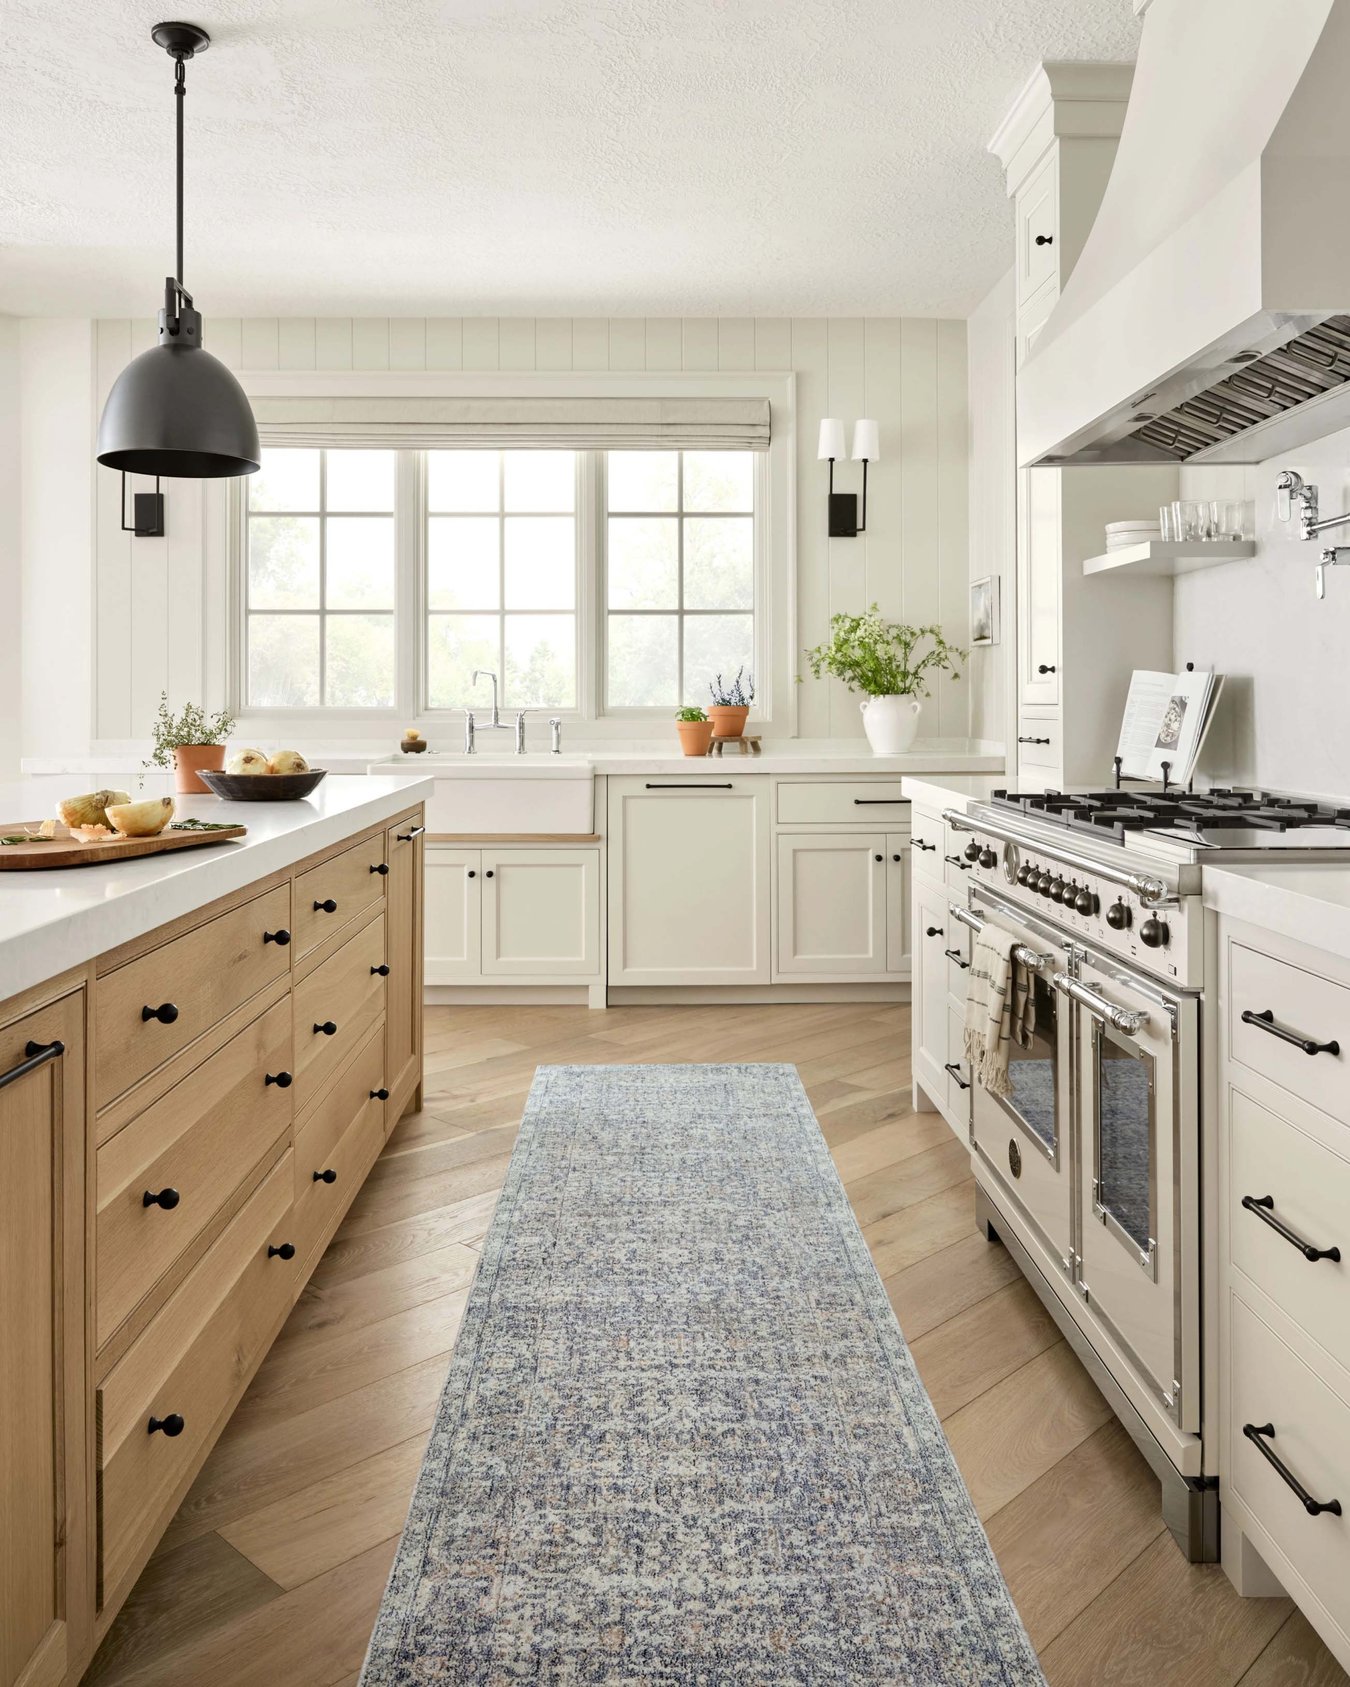 Bright kitchen with a blue runner rug in between a stove and kitchen island.